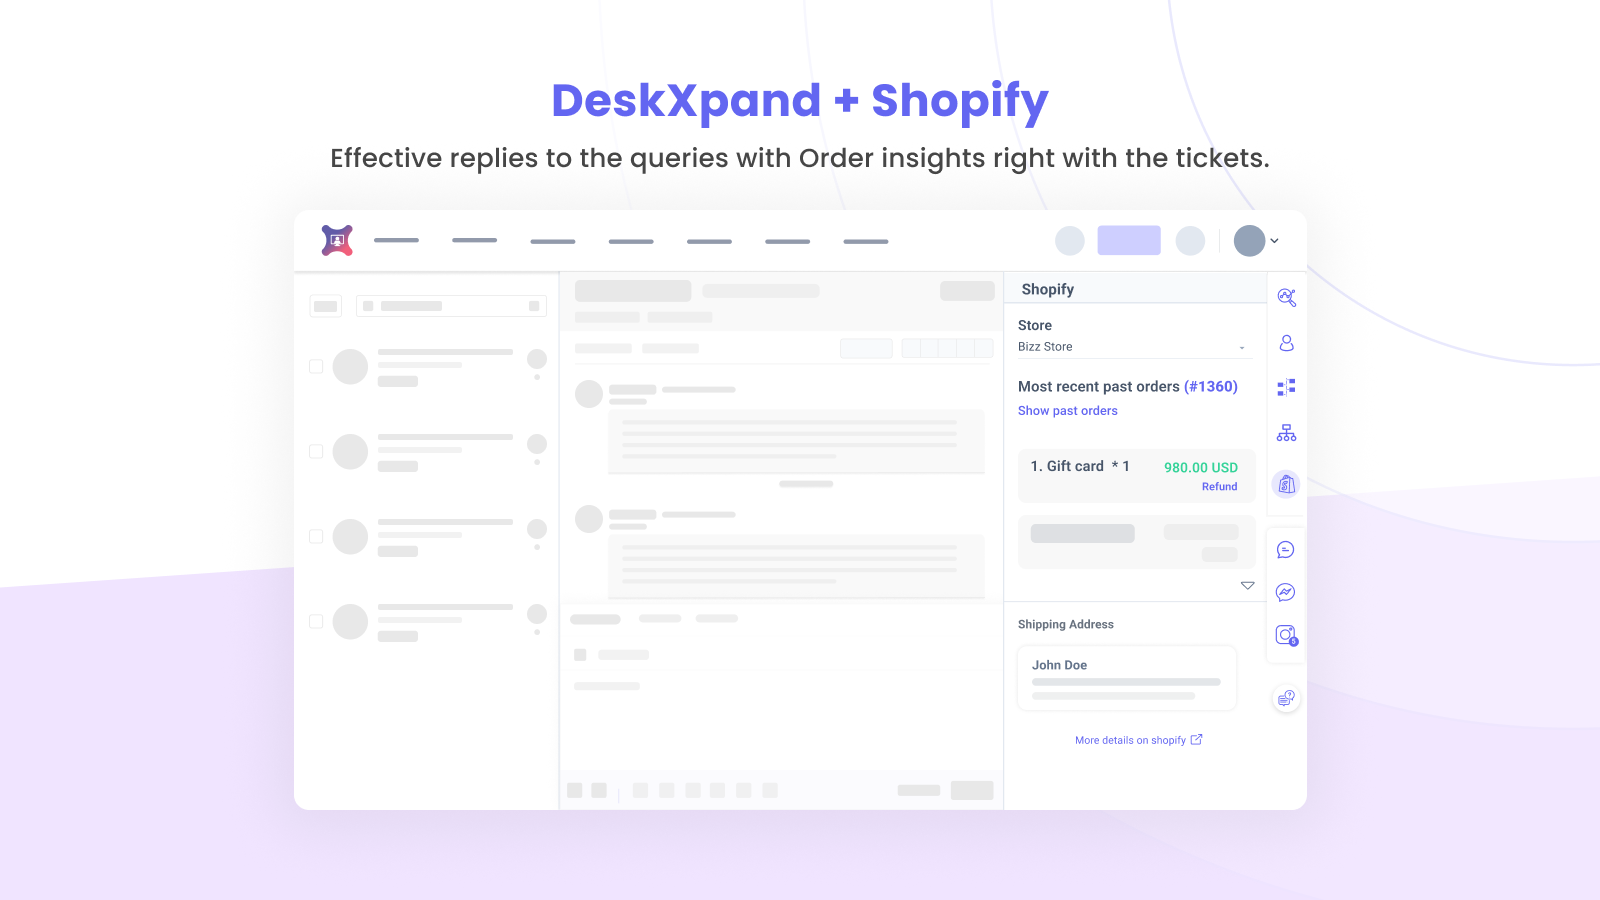 Ticketing-Centeralizing Queries from Multiple Channels